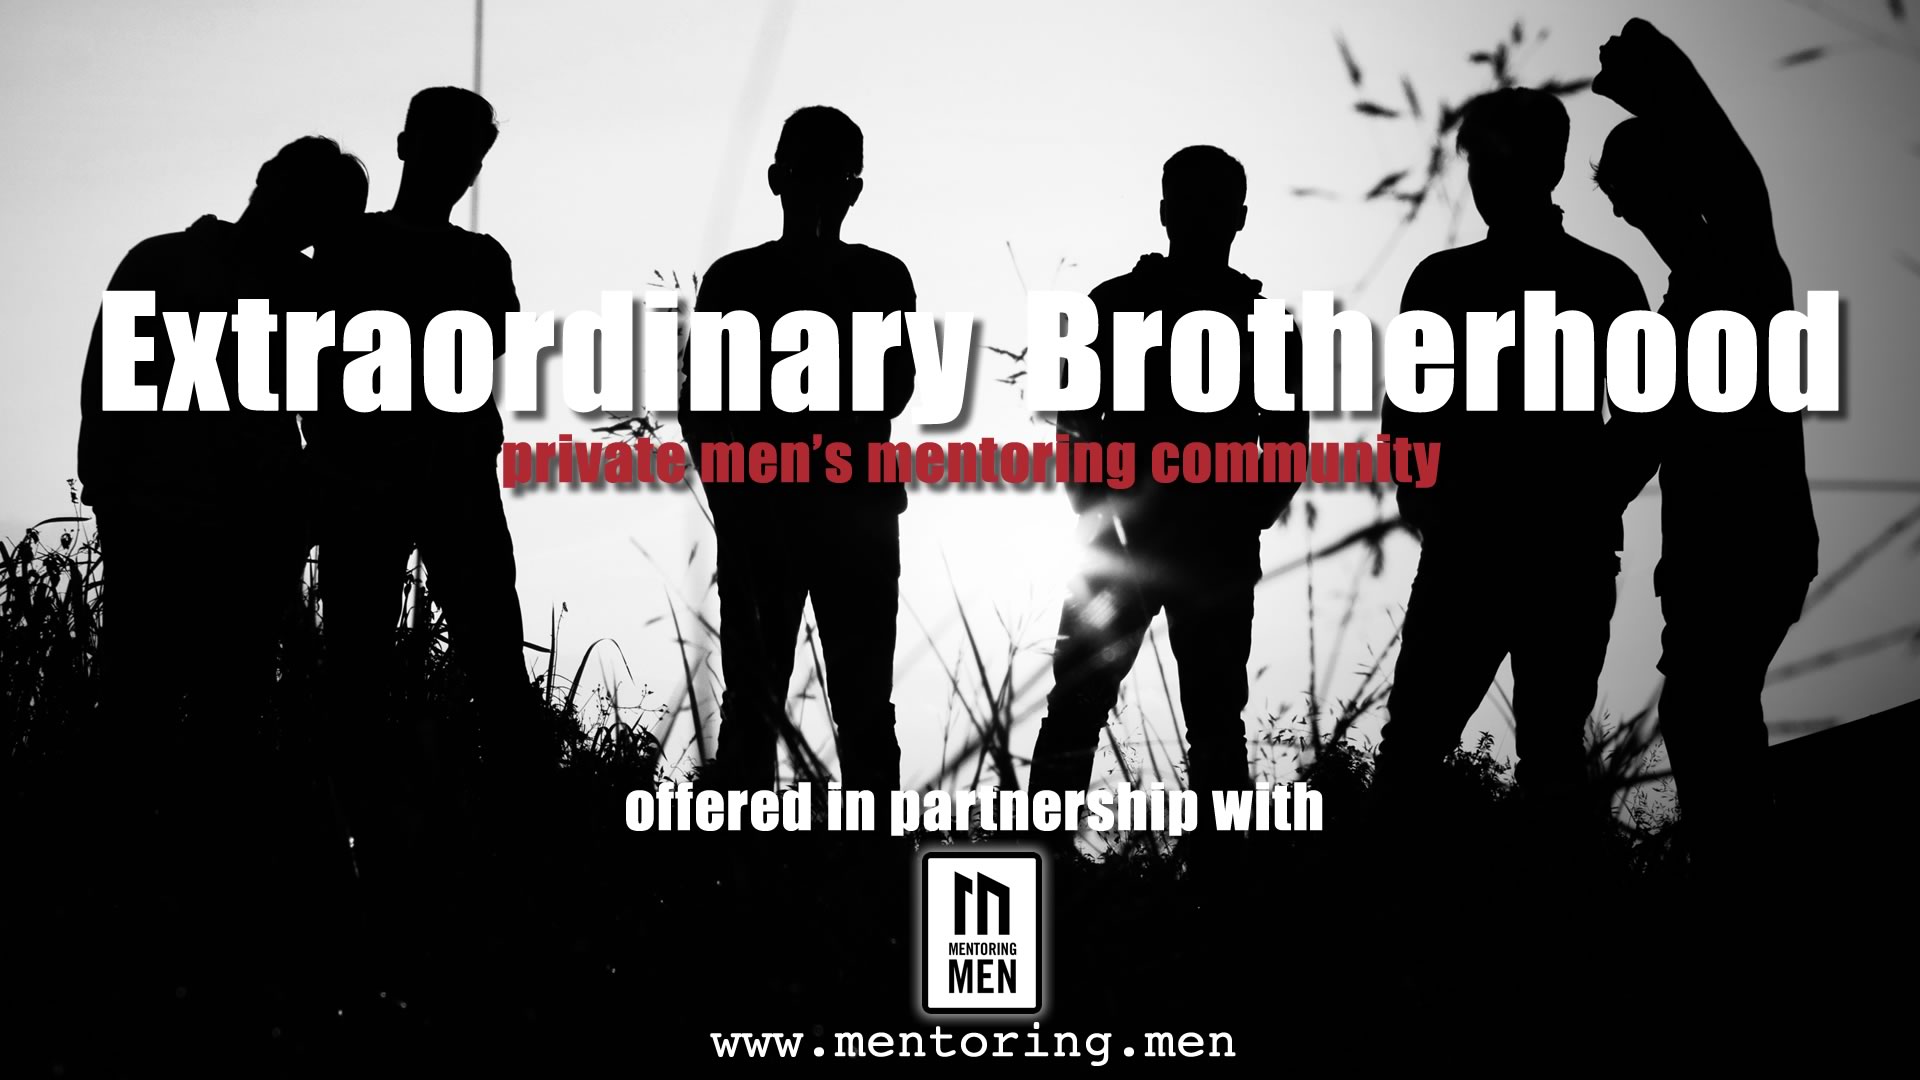 Brotherhood and community for men